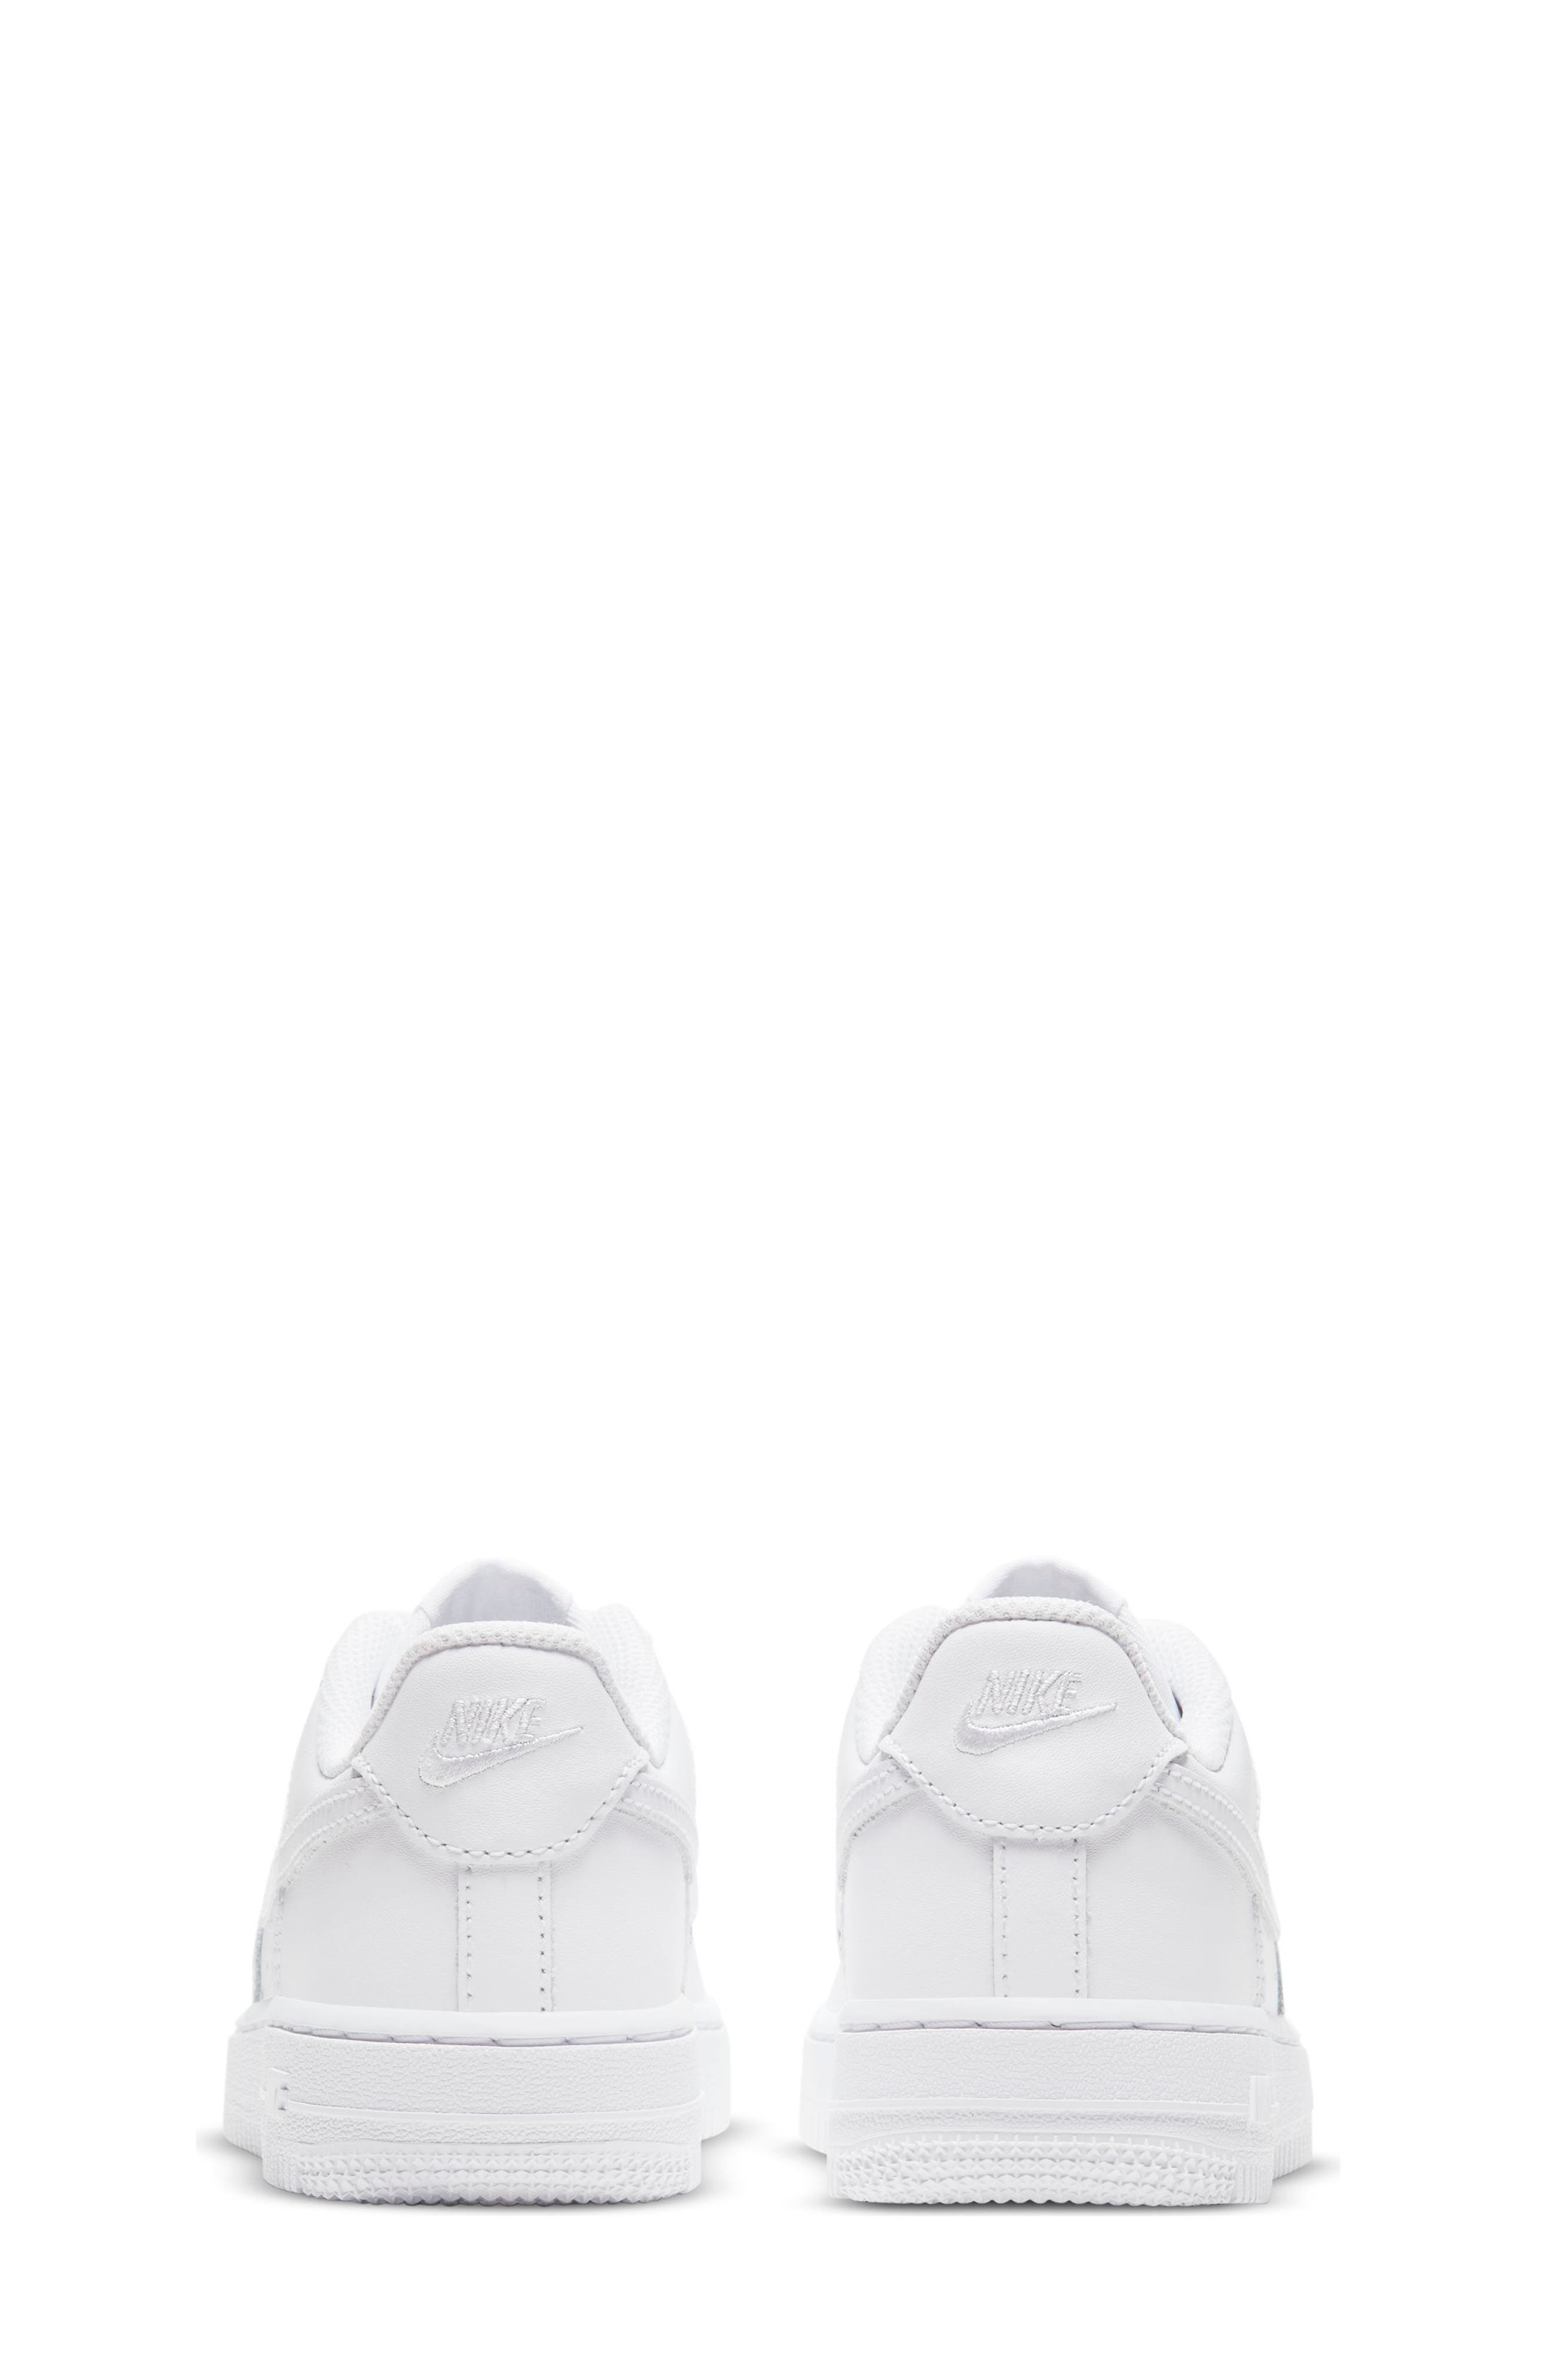 all white air force ones toddlers